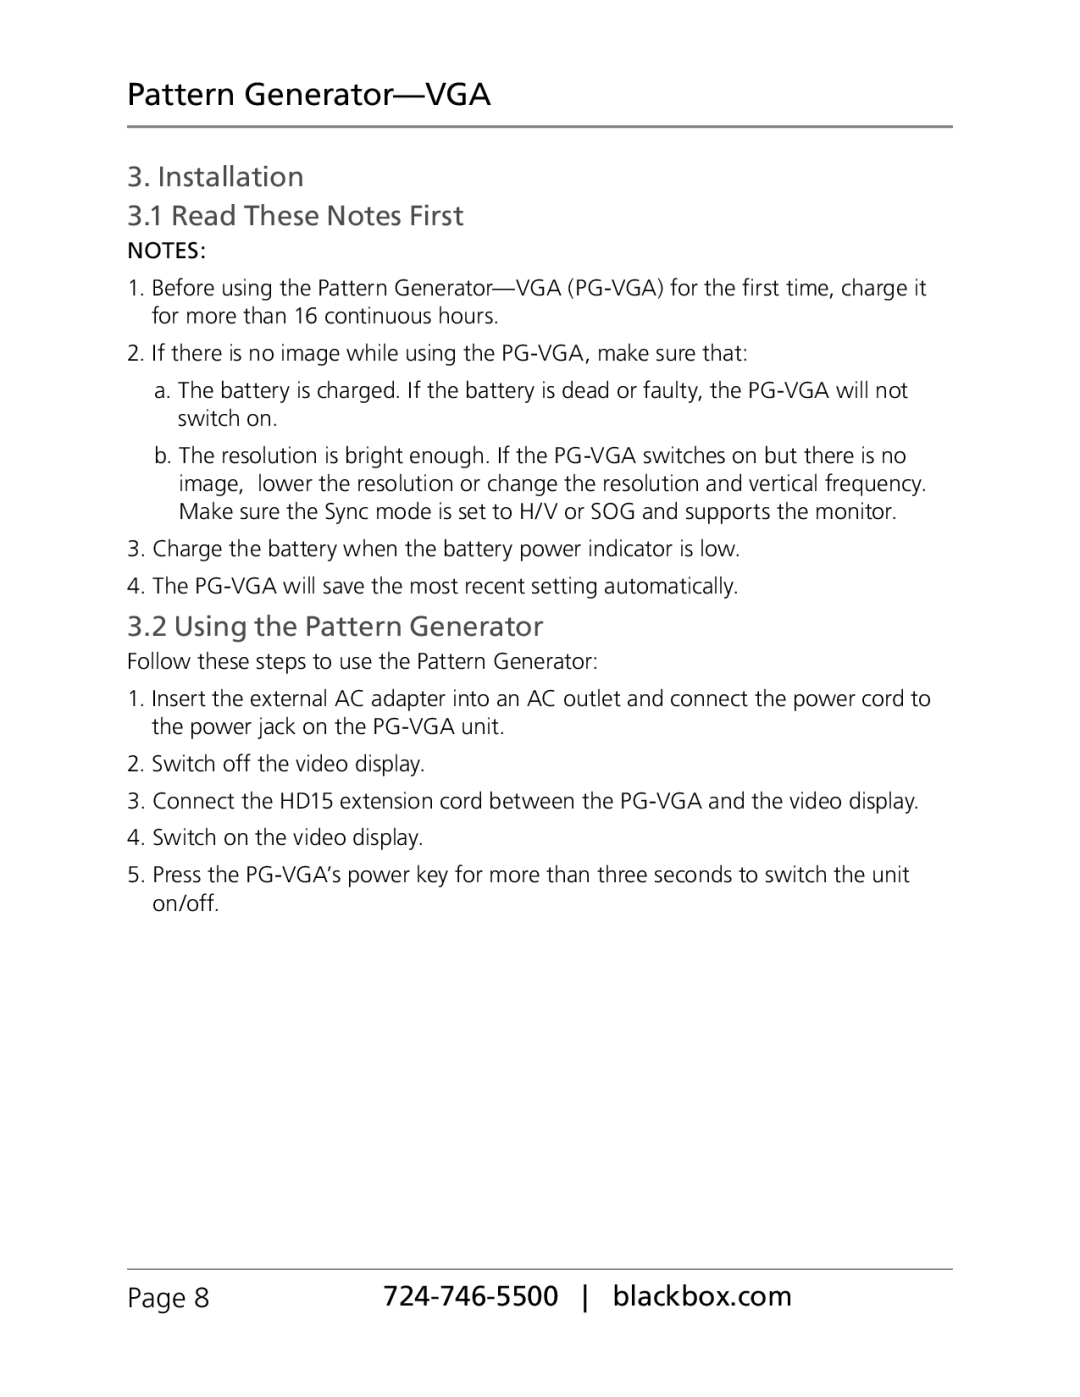 Black Box PG-VGA manual Installation 3.1 Read These Notes First, Using the Pattern Generator, Pattern Generator-VGA, Page 